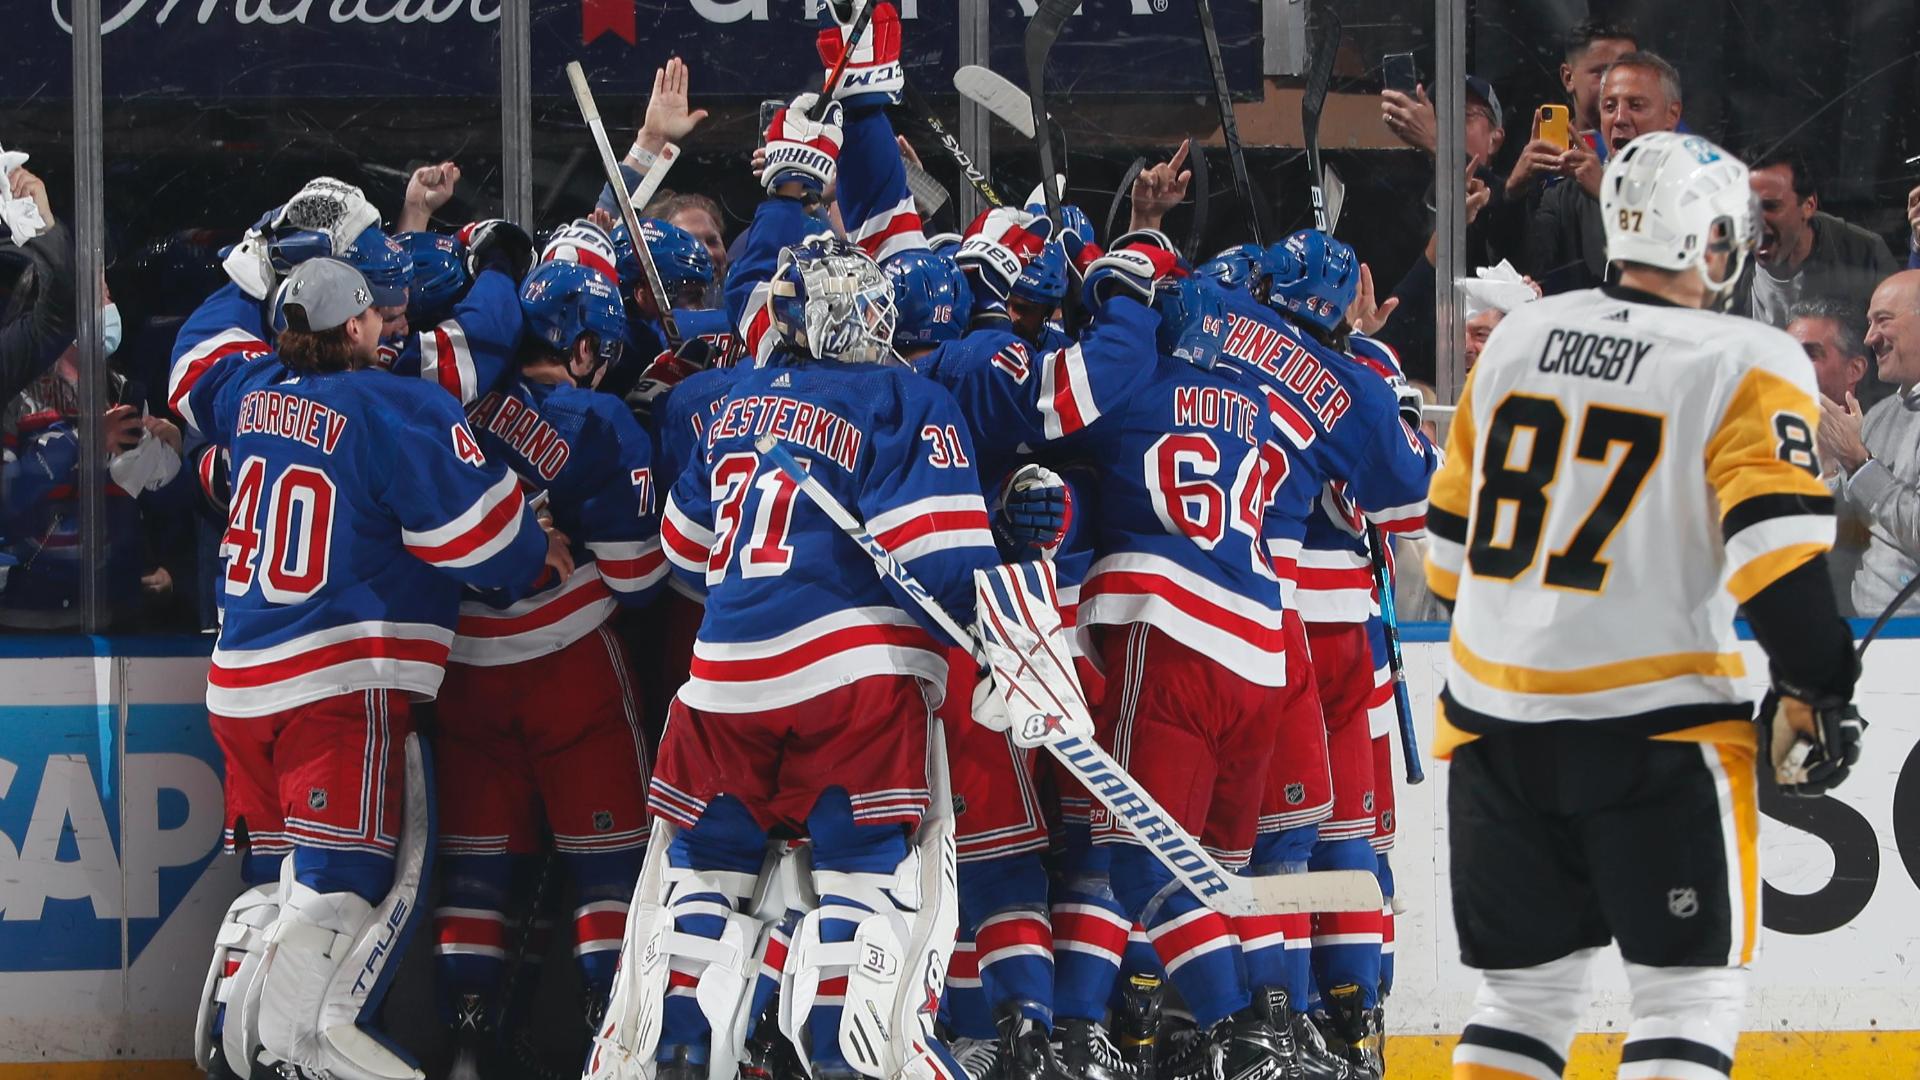 Rangers rally again to win Game 7 in an OT classic